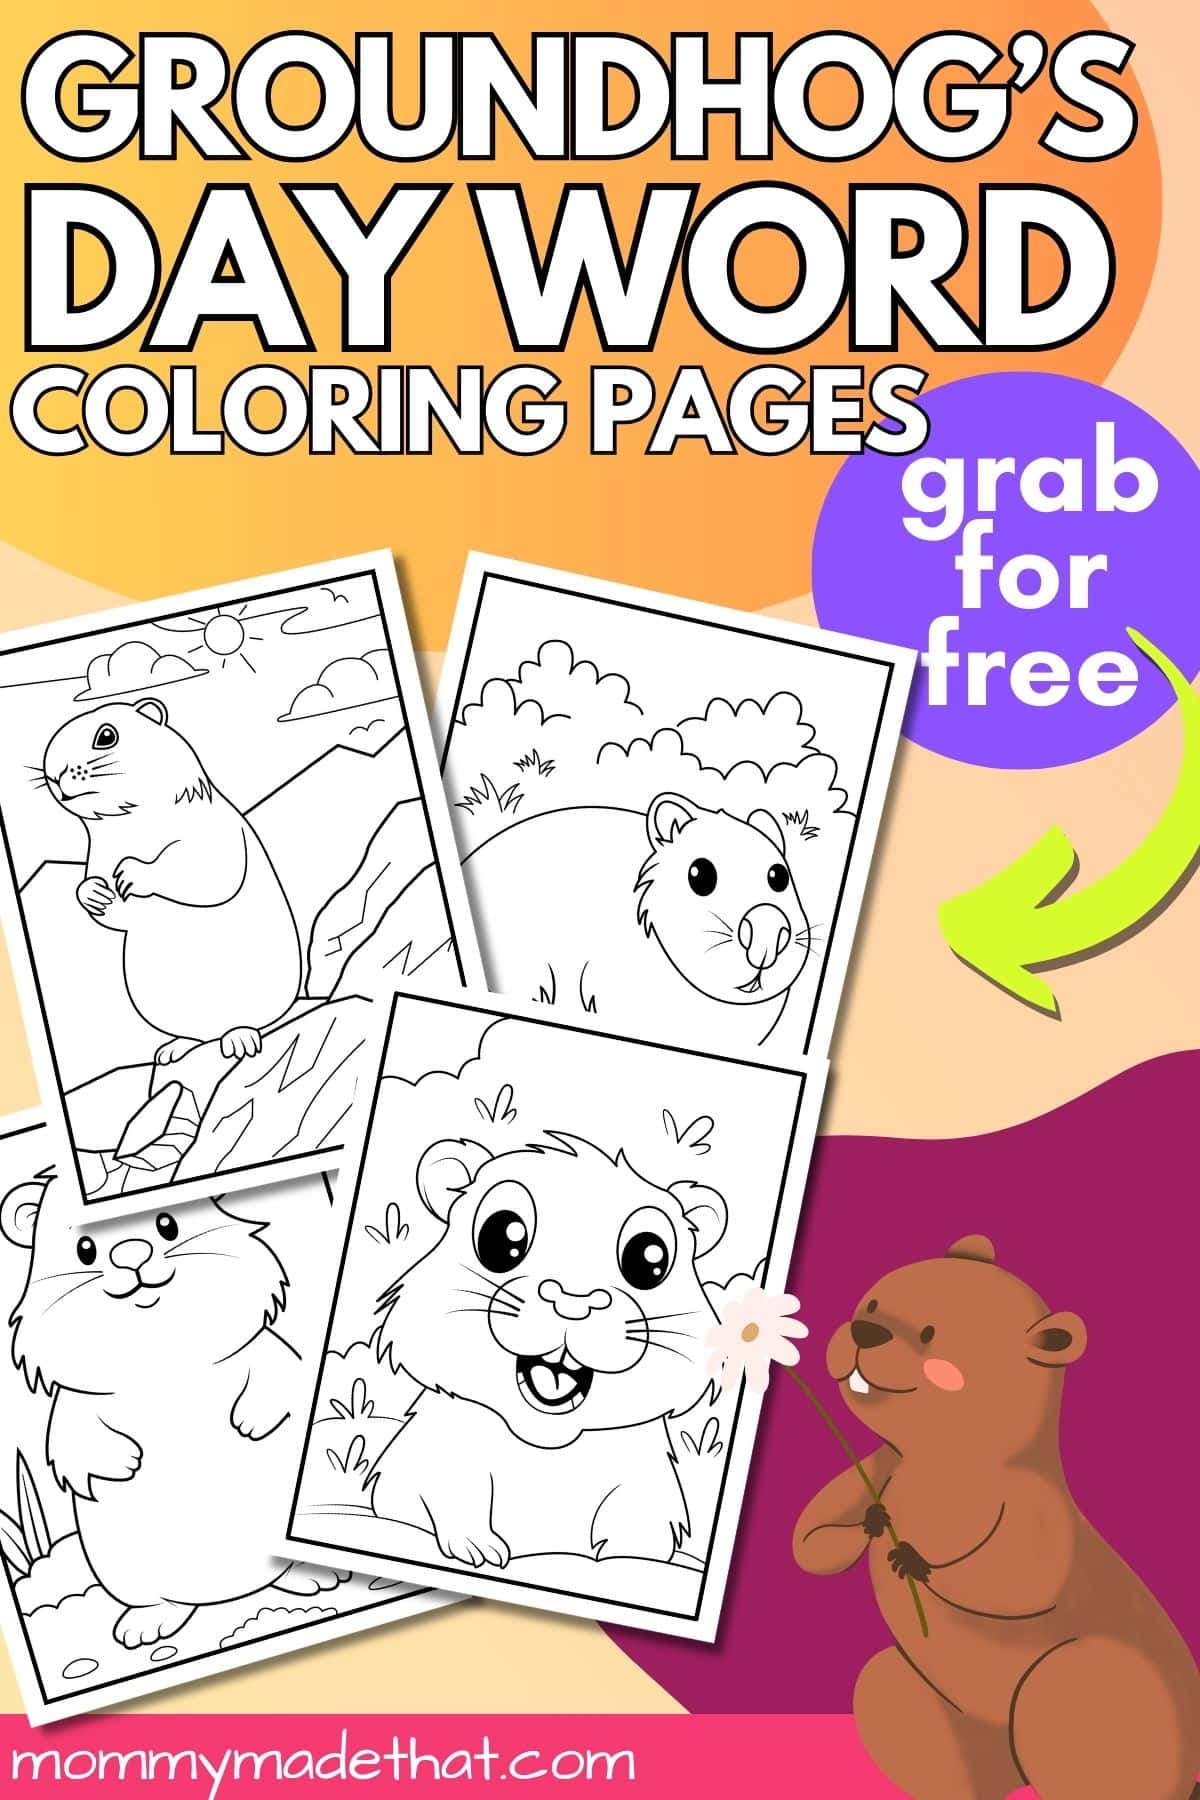 Groundhog day coloring pages.